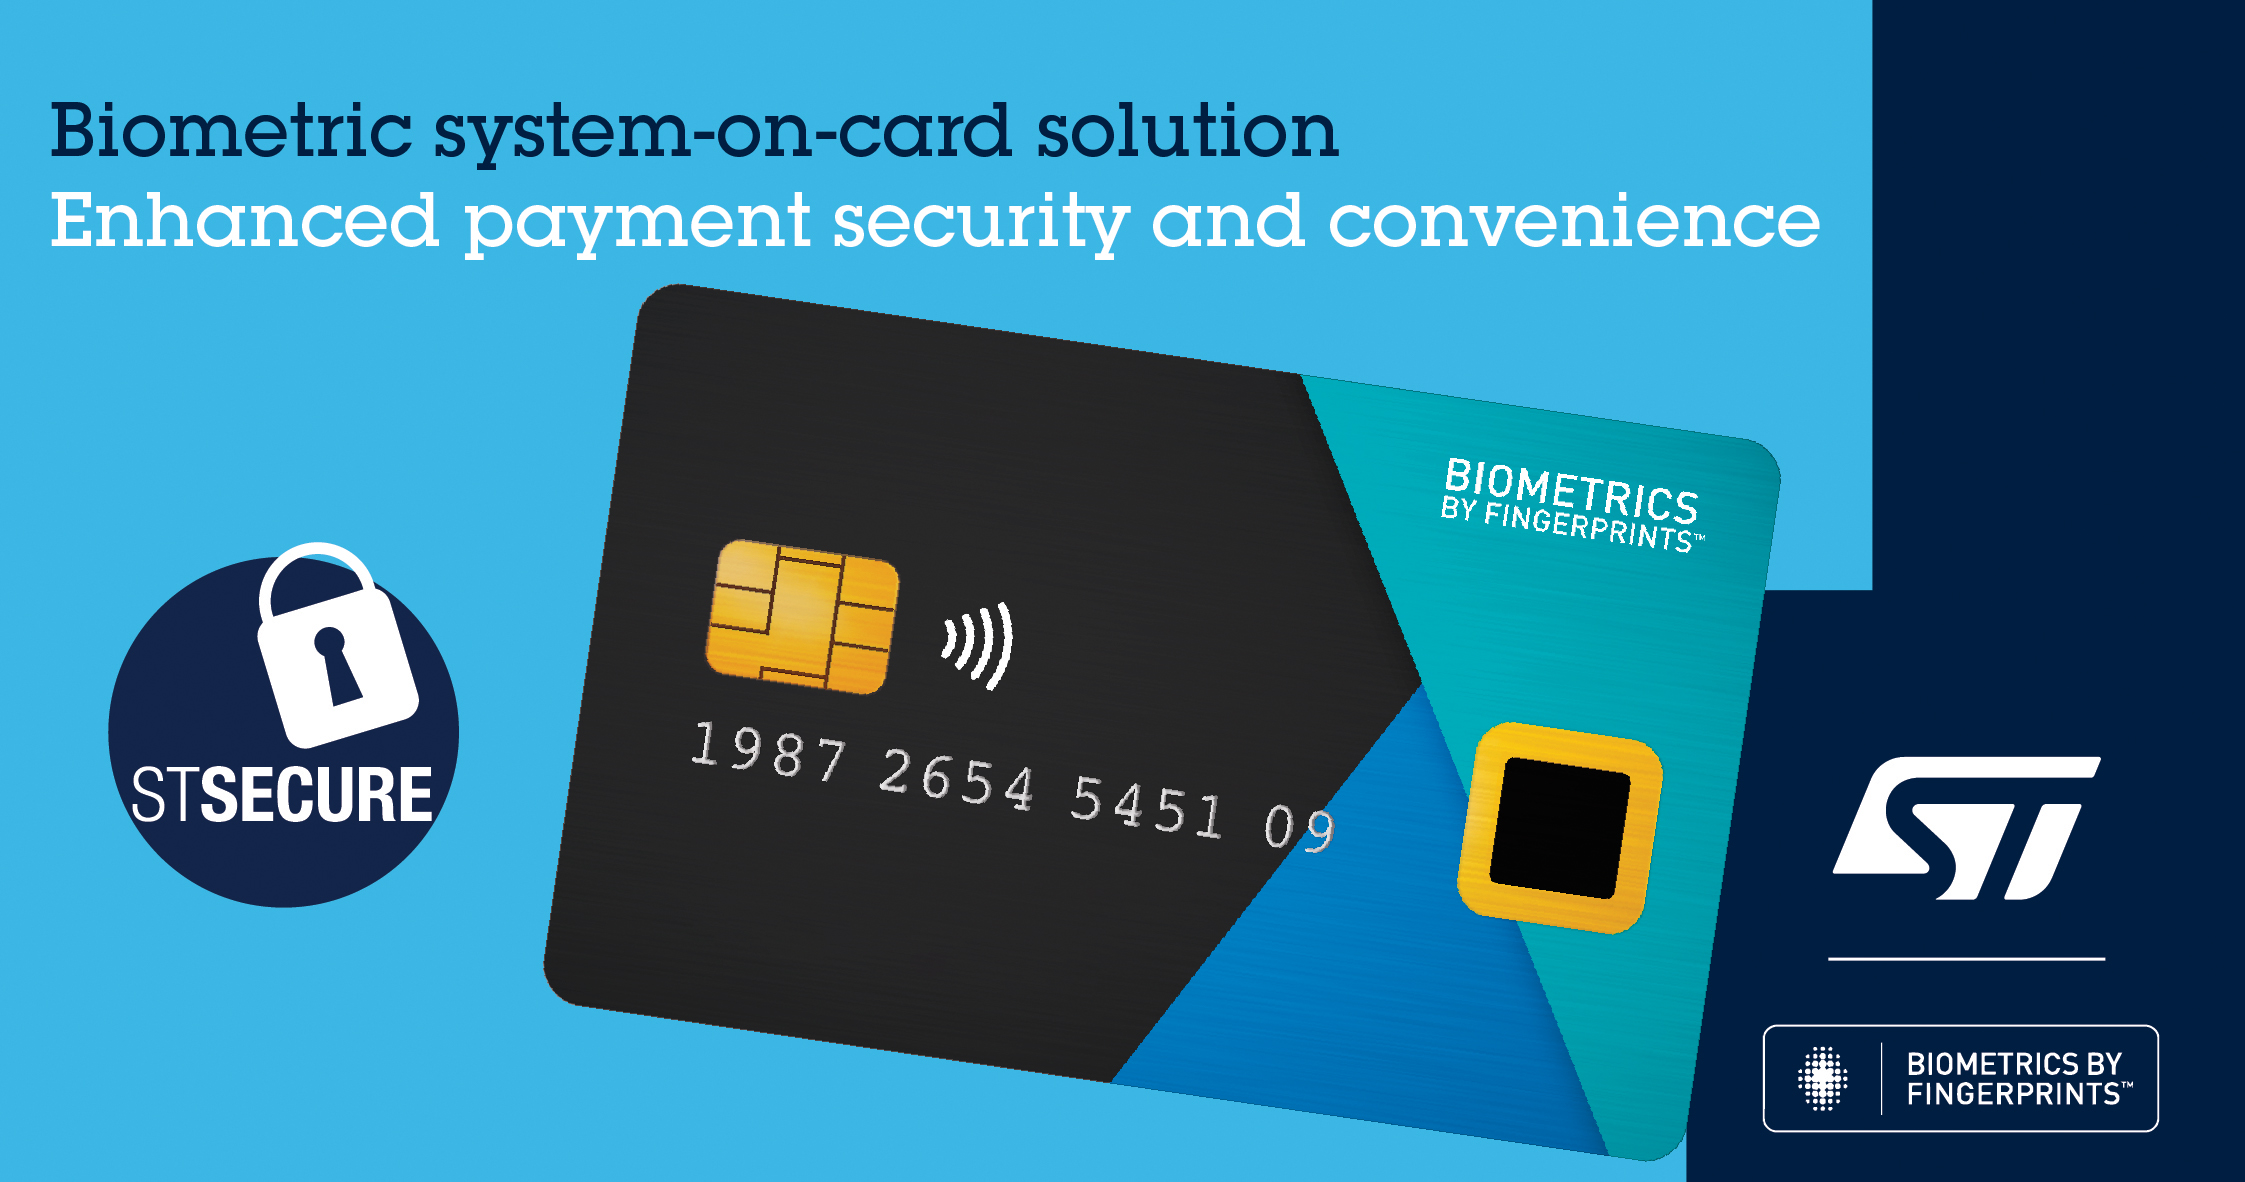 STMicroelectronics and Fingerprint Cards Cooperate to Develop and Launch an Advanced Biometric Payment Card Solution